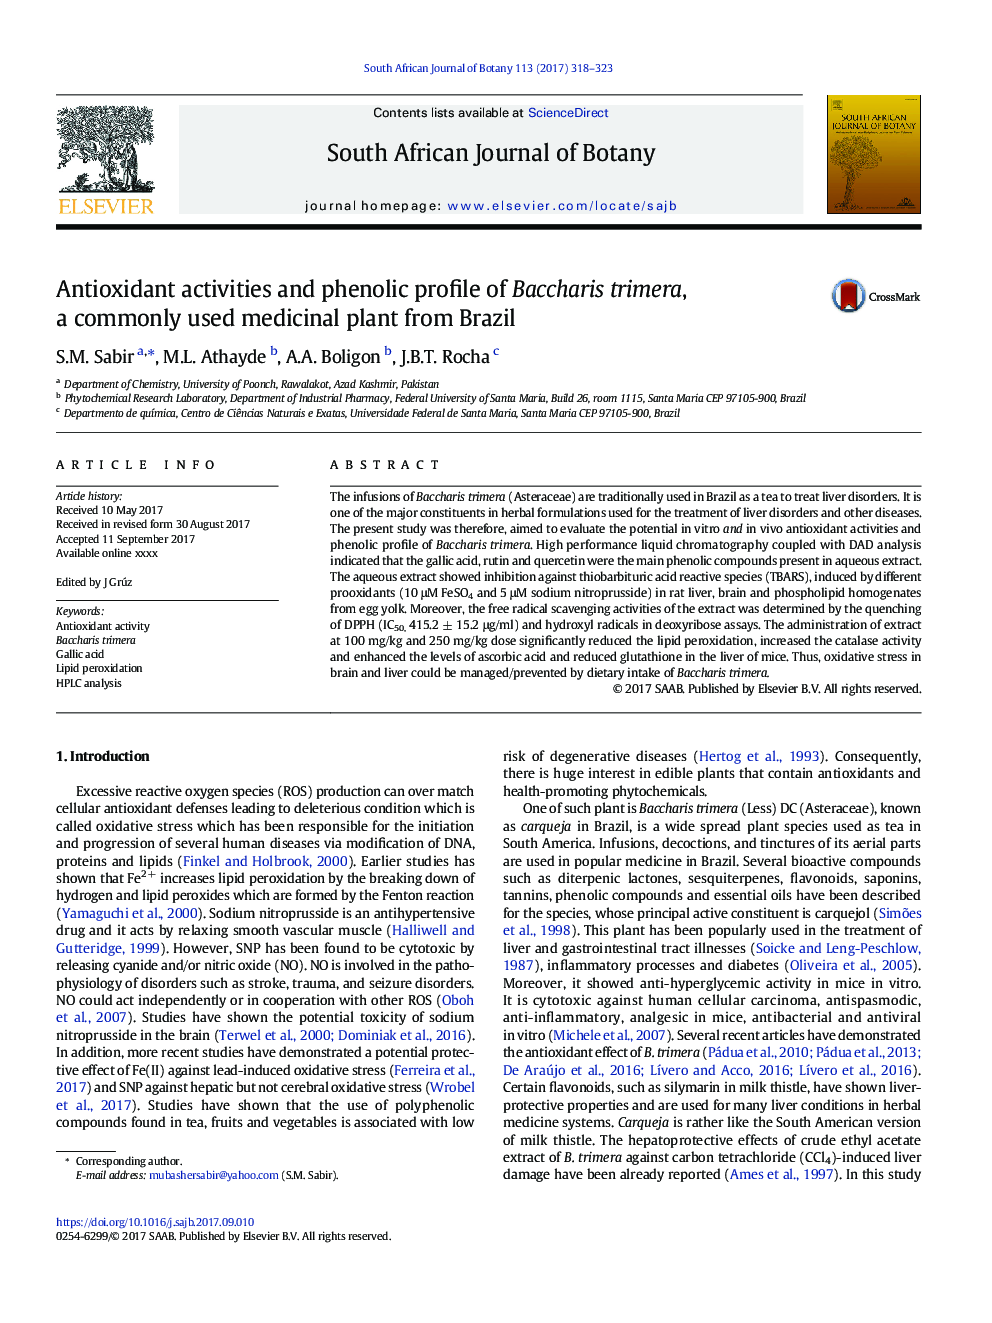 Antioxidant activities and phenolic profile of Baccharis trimera, a commonly used medicinal plant from Brazil